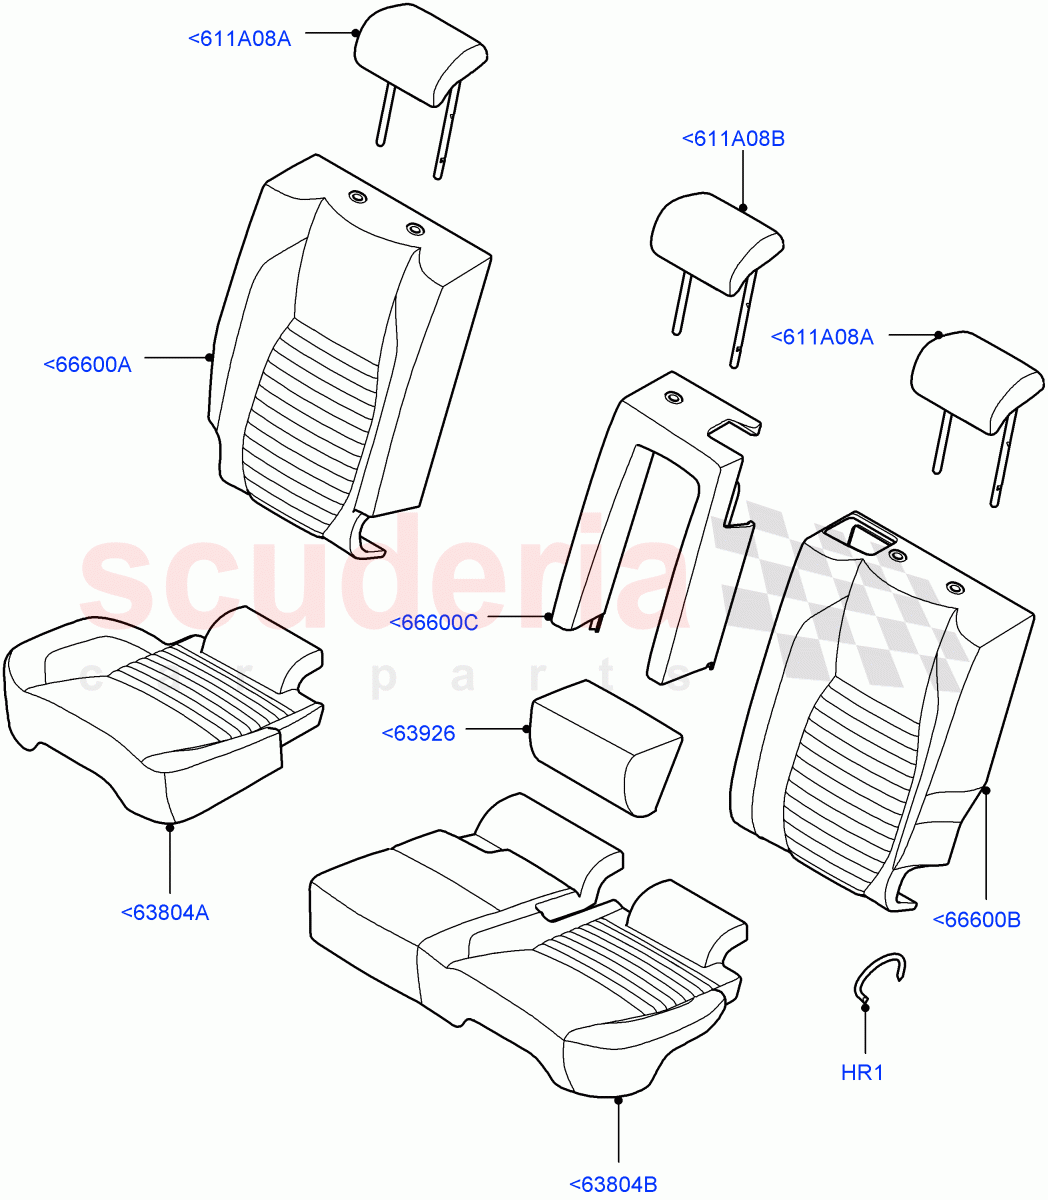 Rear Seat Covers(Taurus Leather Perforated,Itatiaia (Brazil),With 60/40 Manual Fold Thru Rr Seat)((V)FROMLT000001) of Land Rover Land Rover Discovery Sport (2015+) [2.0 Turbo Diesel]